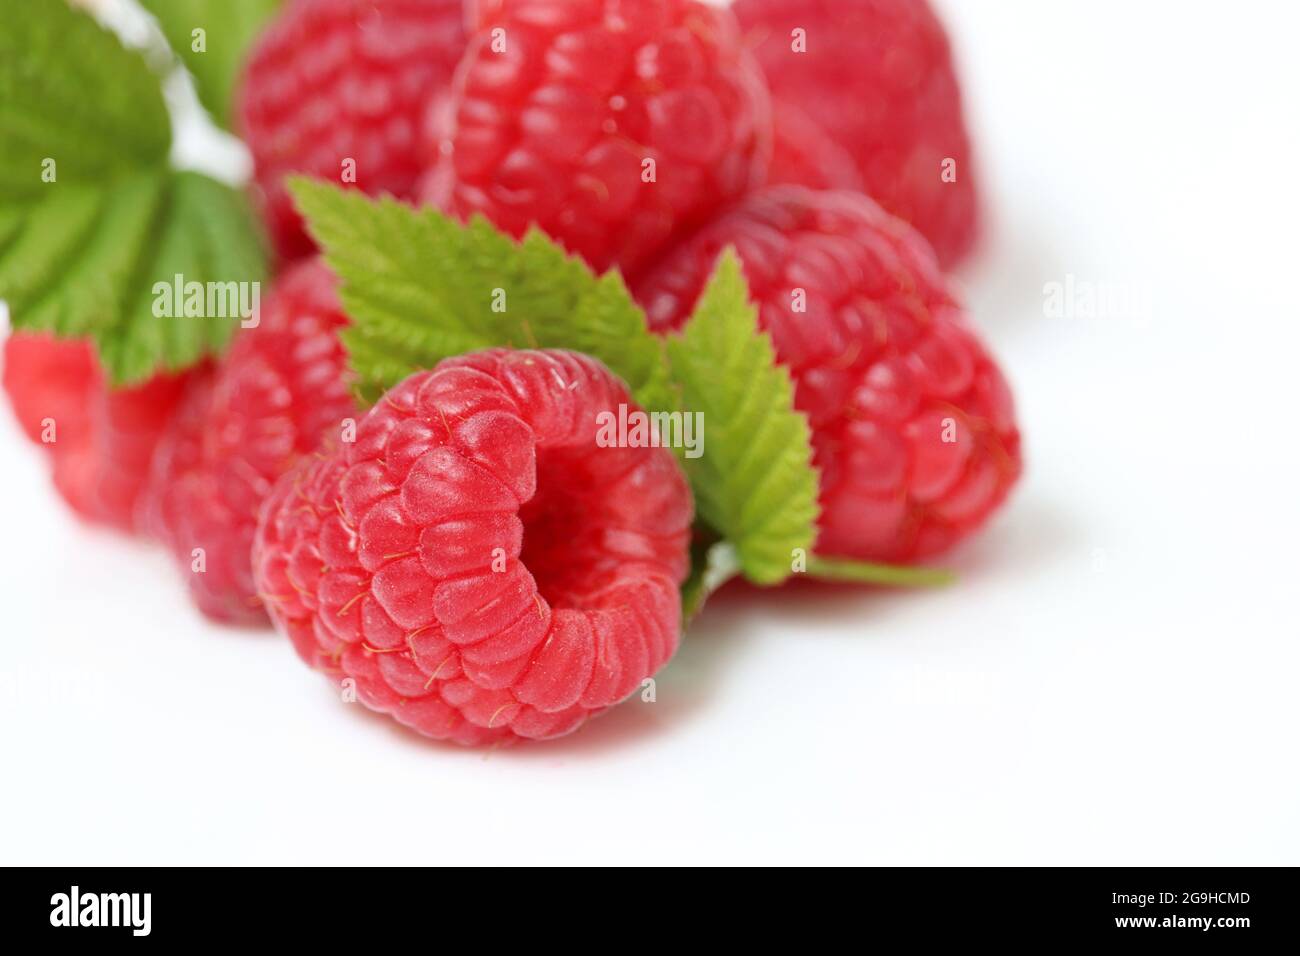 Ripe raspberries with green leaves on white background. Red juicy berries close up, summer crop Stock Photo